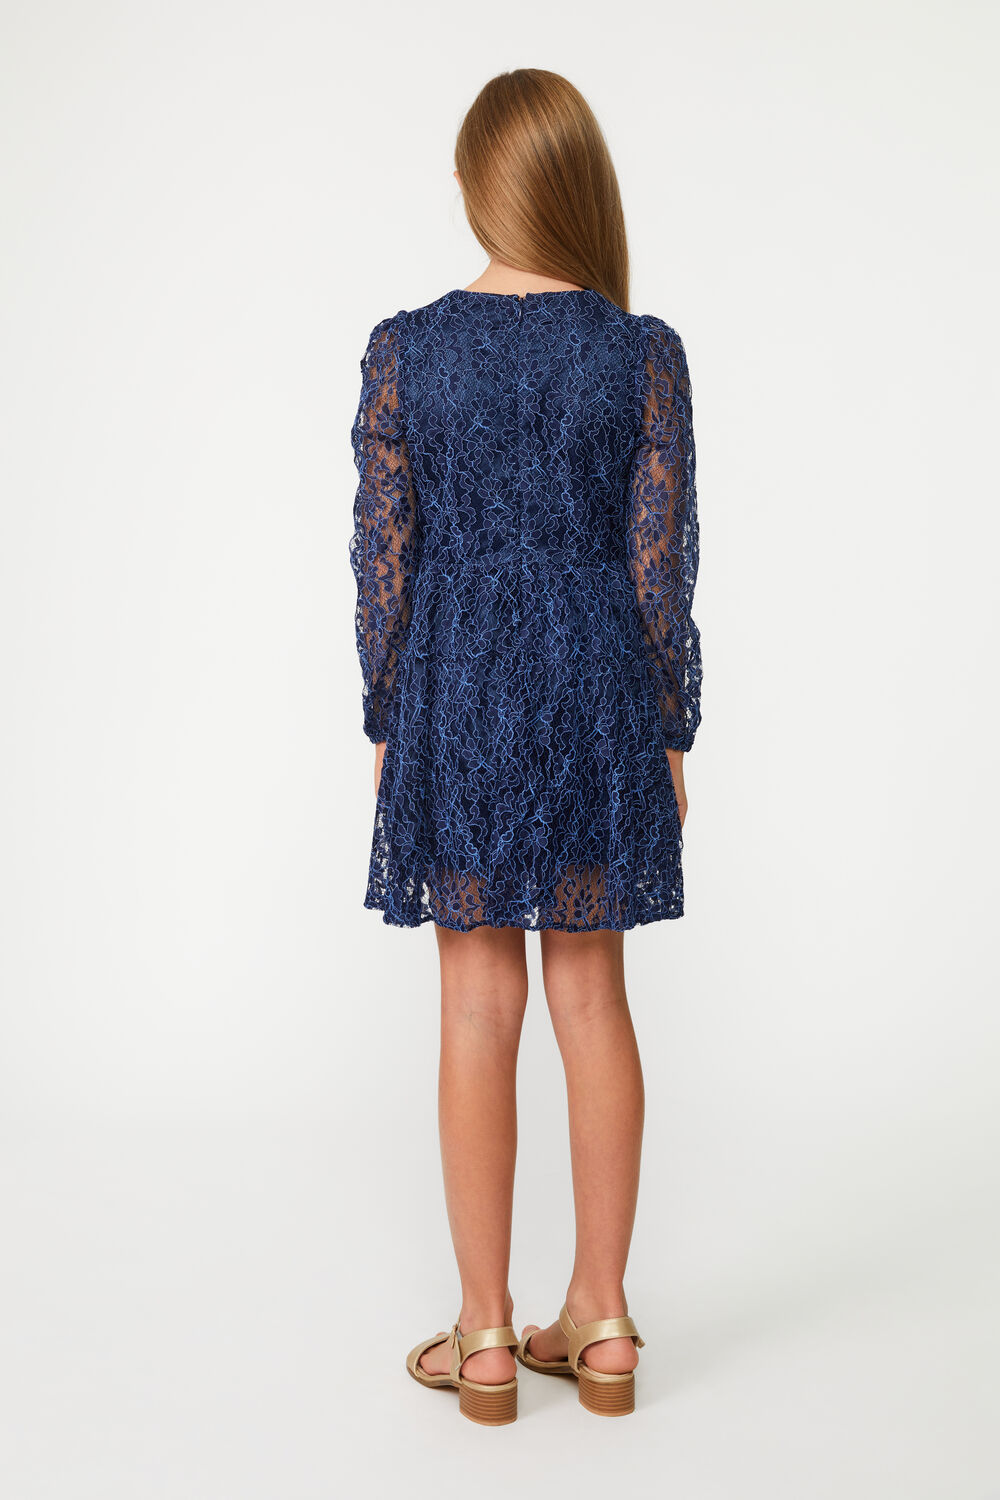 SIENNA TIERED LACE DRESS in colour BLACK IRIS